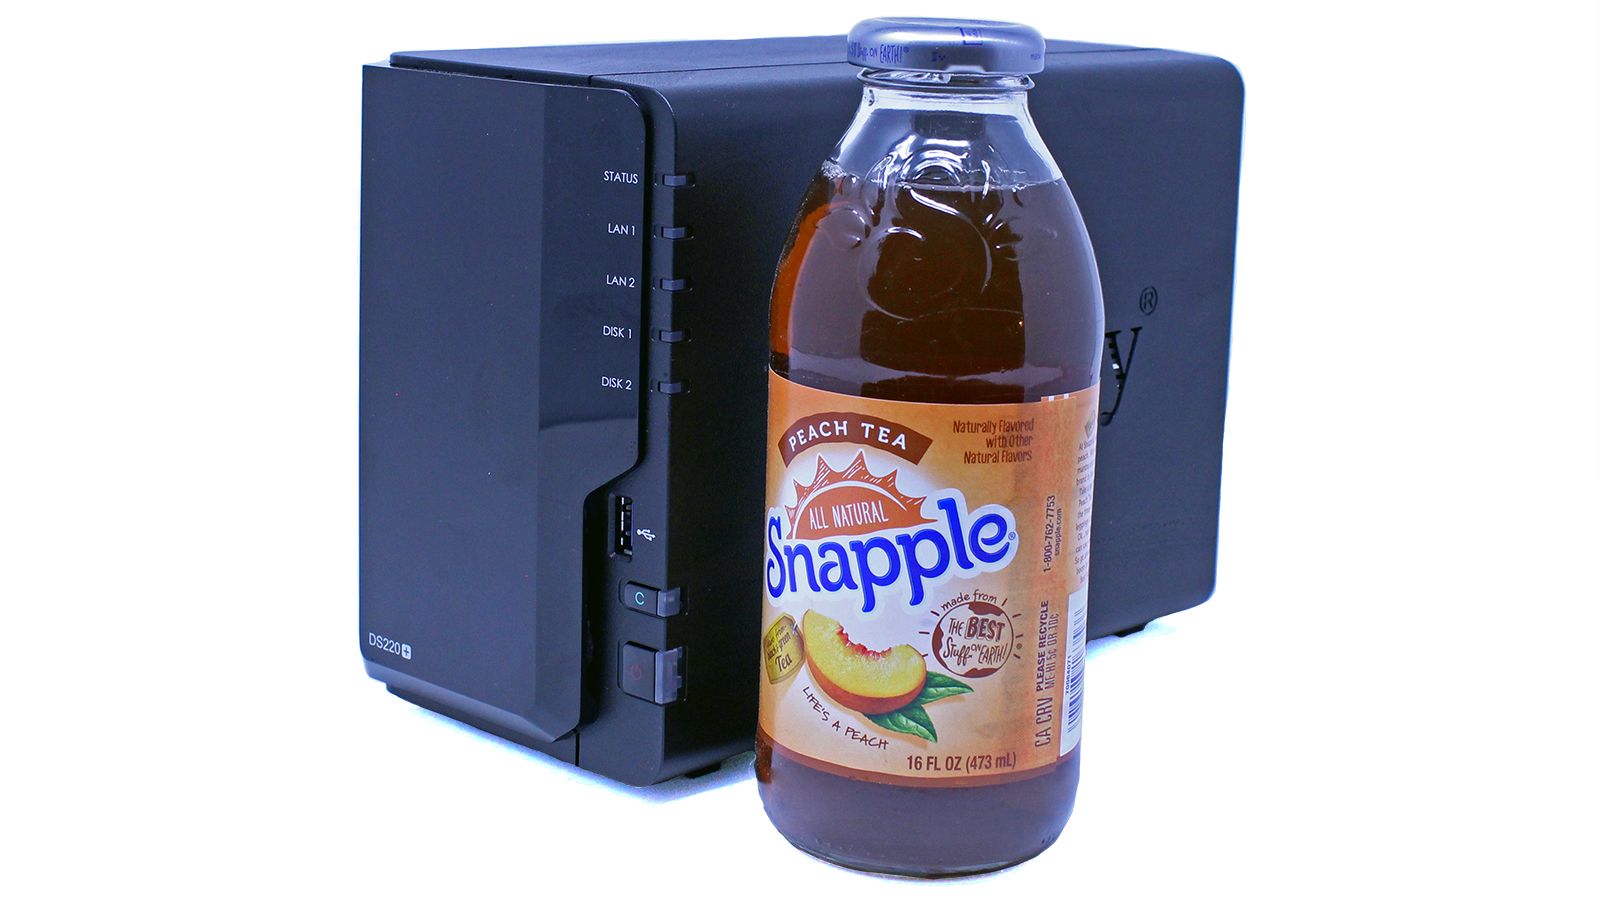 A DS220+ NAS next to a Snapple.